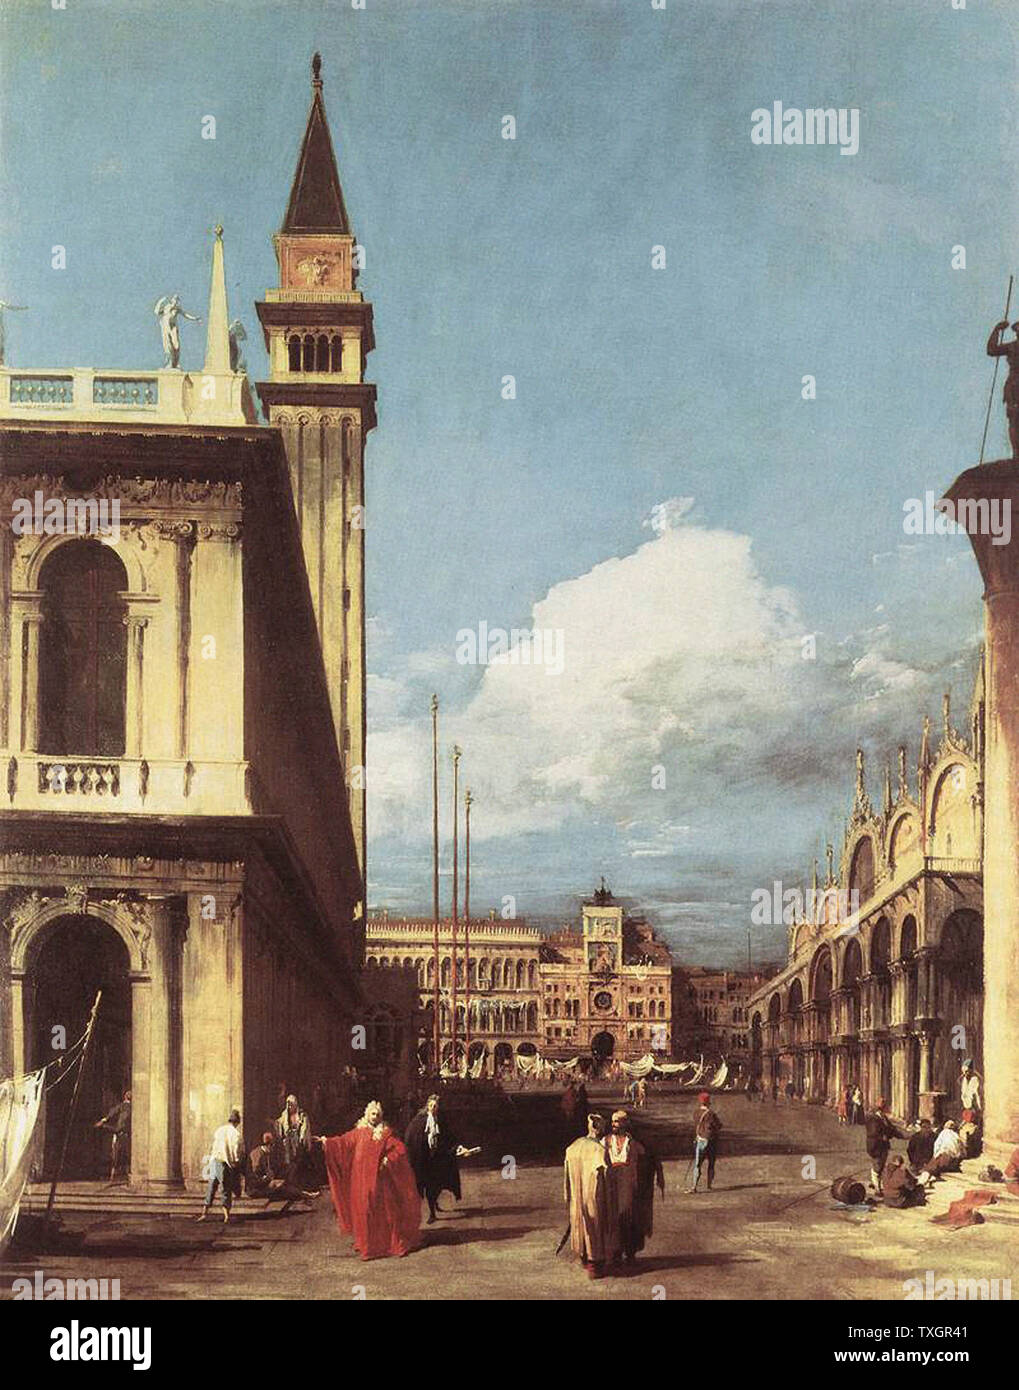 Giovanni Antonio Canal a.k.a Canaletto - Piazzett Looking Toward Clock Tower C 1727 Stock Photo